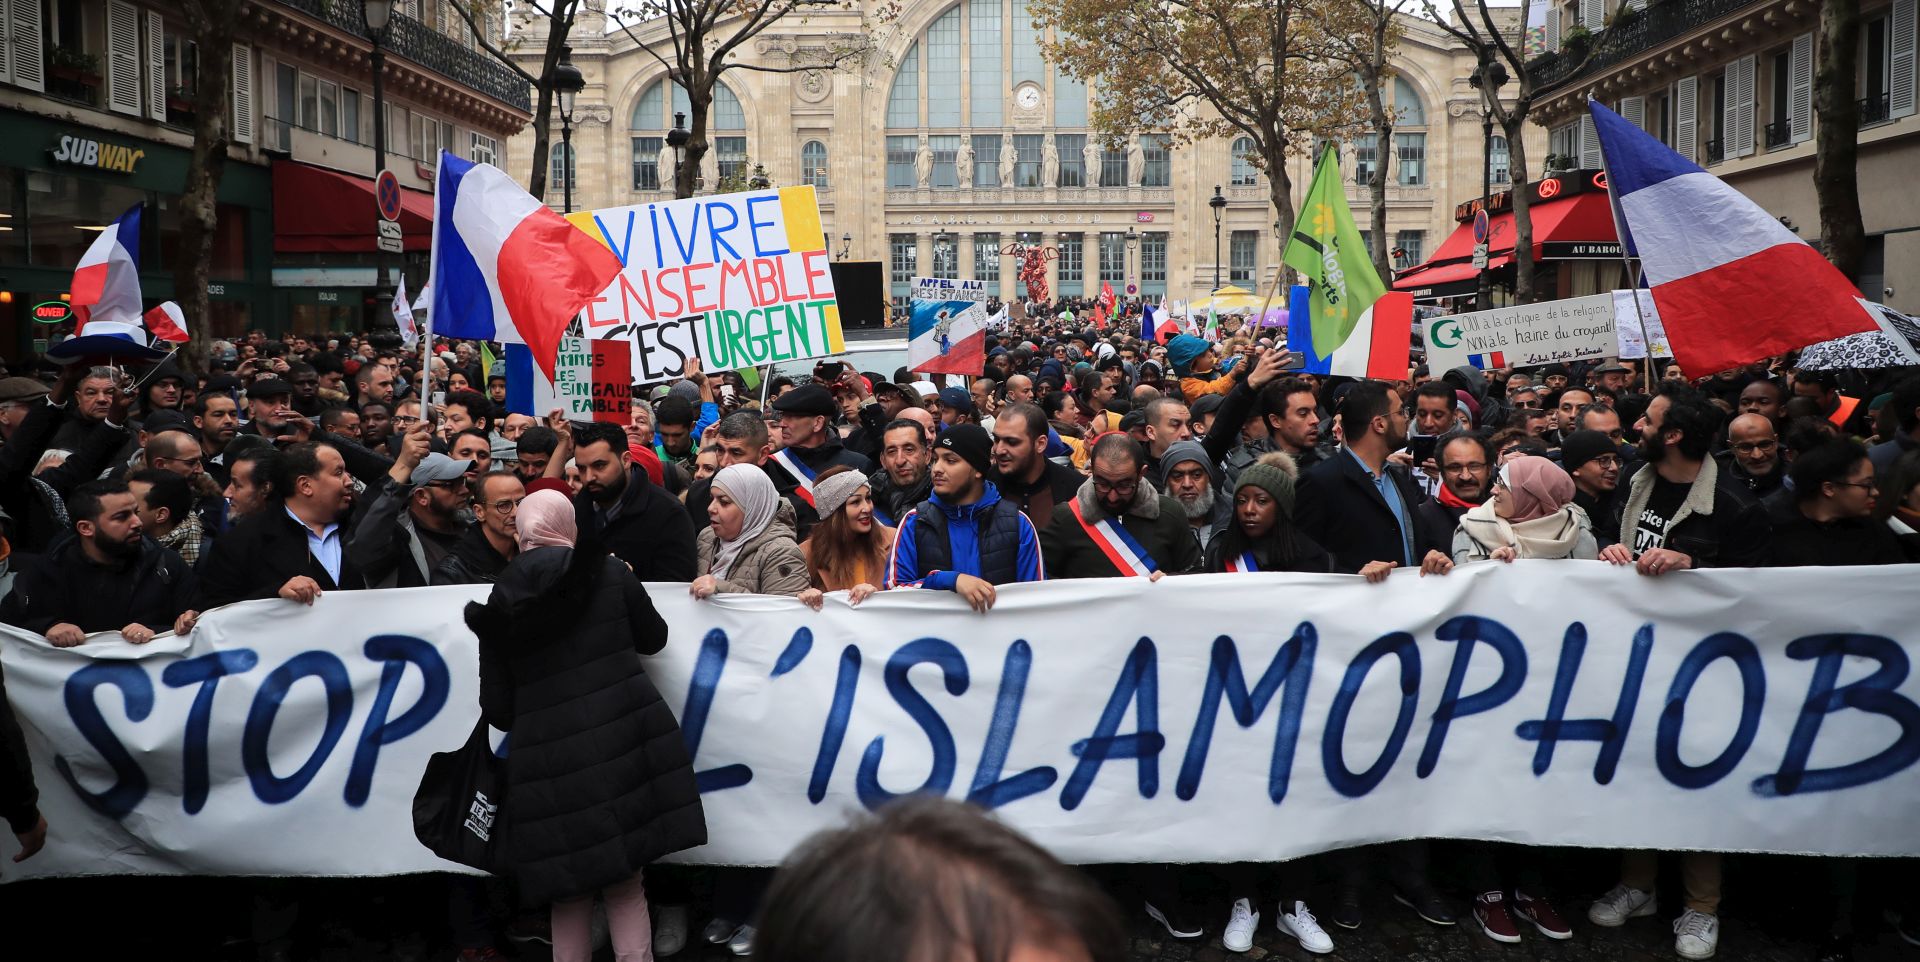 epa07986133 People and members of anti-racism associations gather to protest against Islamophobia at the Gare du Nord in Paris, France, 10 November 2019. Protesters gathered to protest against the anti-Muslim acts in France. The demonstration was called by the Collective Contre l’Islamophobie in France (CCIF), following an attack against a mosque in Bayonne on 28 October where an attacker killed two people that tried to stop him from setting a fire at the doors of the mosque.  EPA/CHRISTOPHE PETIT TESSON